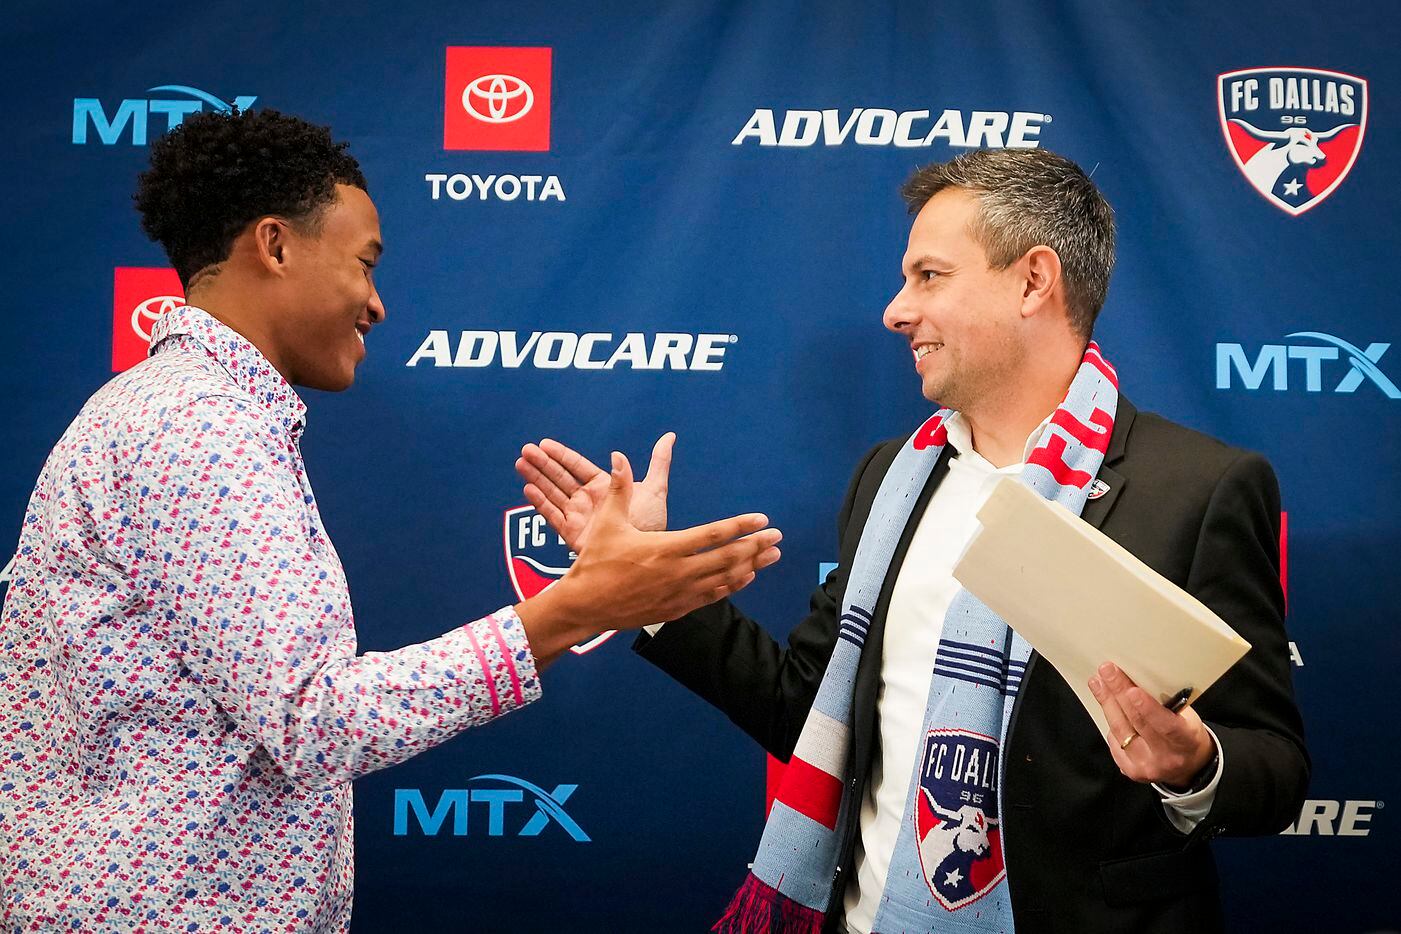 New FC Dallas head coach Nico Estévez (right) is congratulated by defender Collin Smith after his introductory press conference at the National Soccer Hall of Fame on Friday, Dec. 3, 2021, in Frisco, Texas.